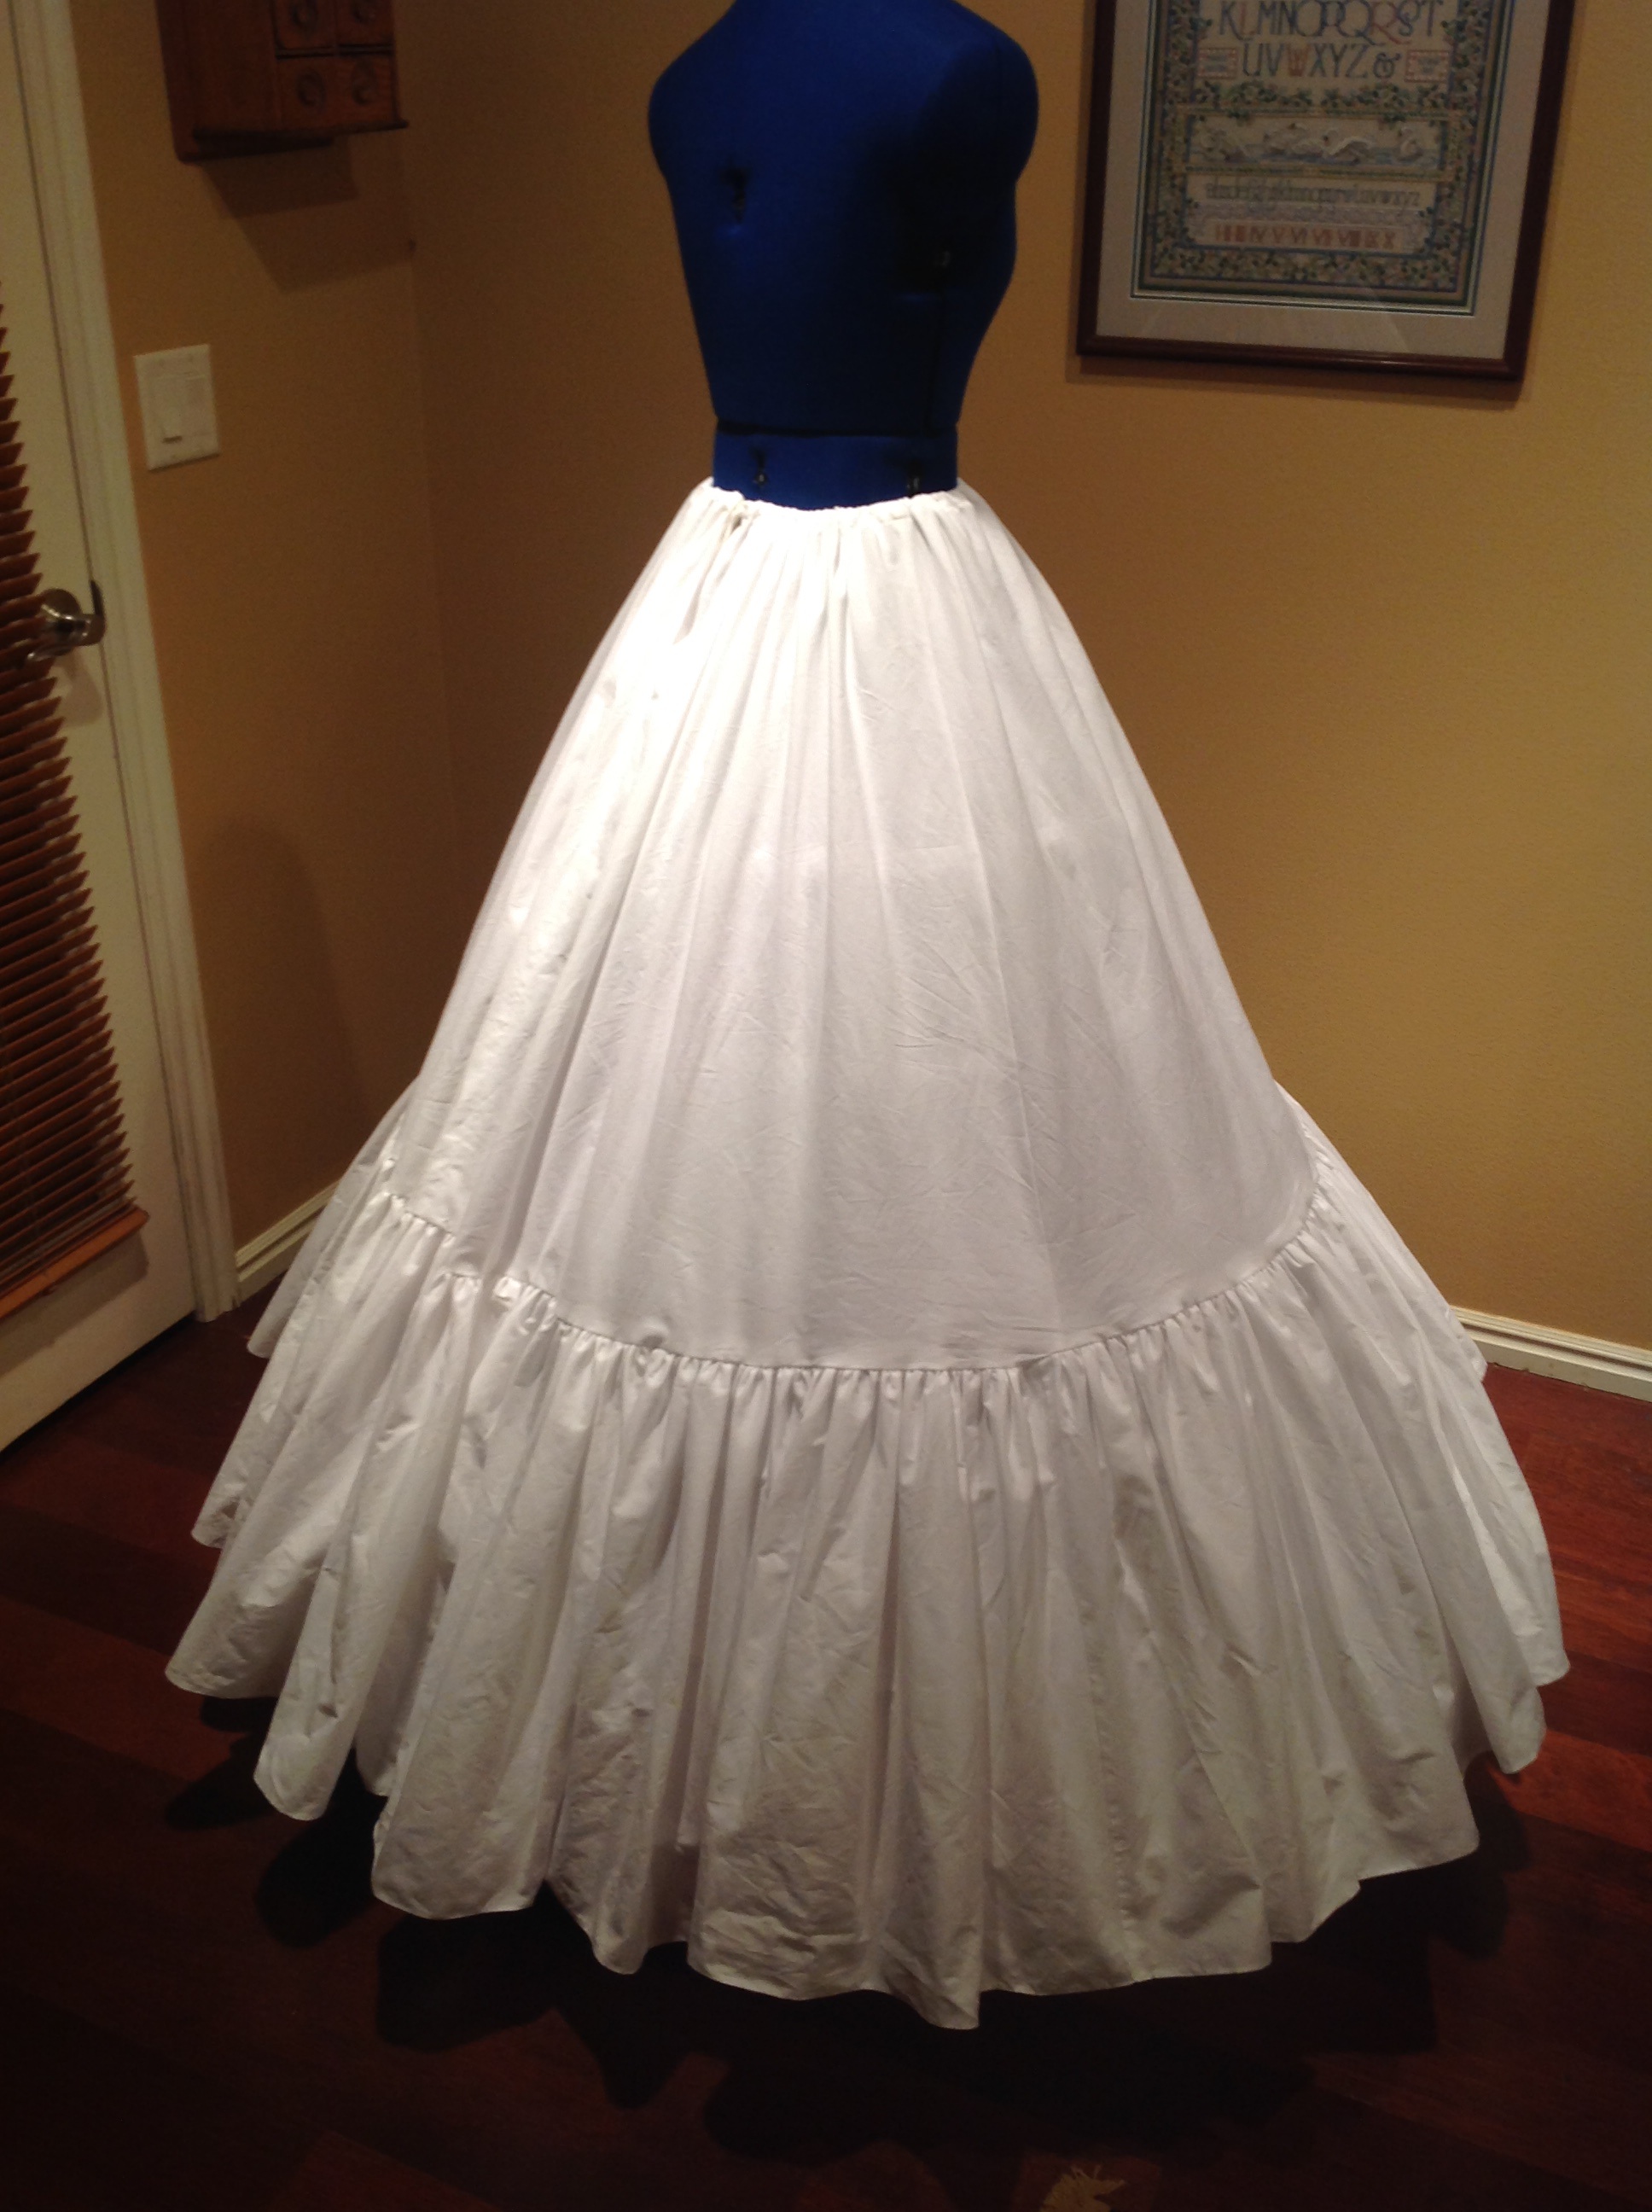 Floofy petticoats finally done for my 1860s Beetlejuice inspired ball gown!  : r/sewing